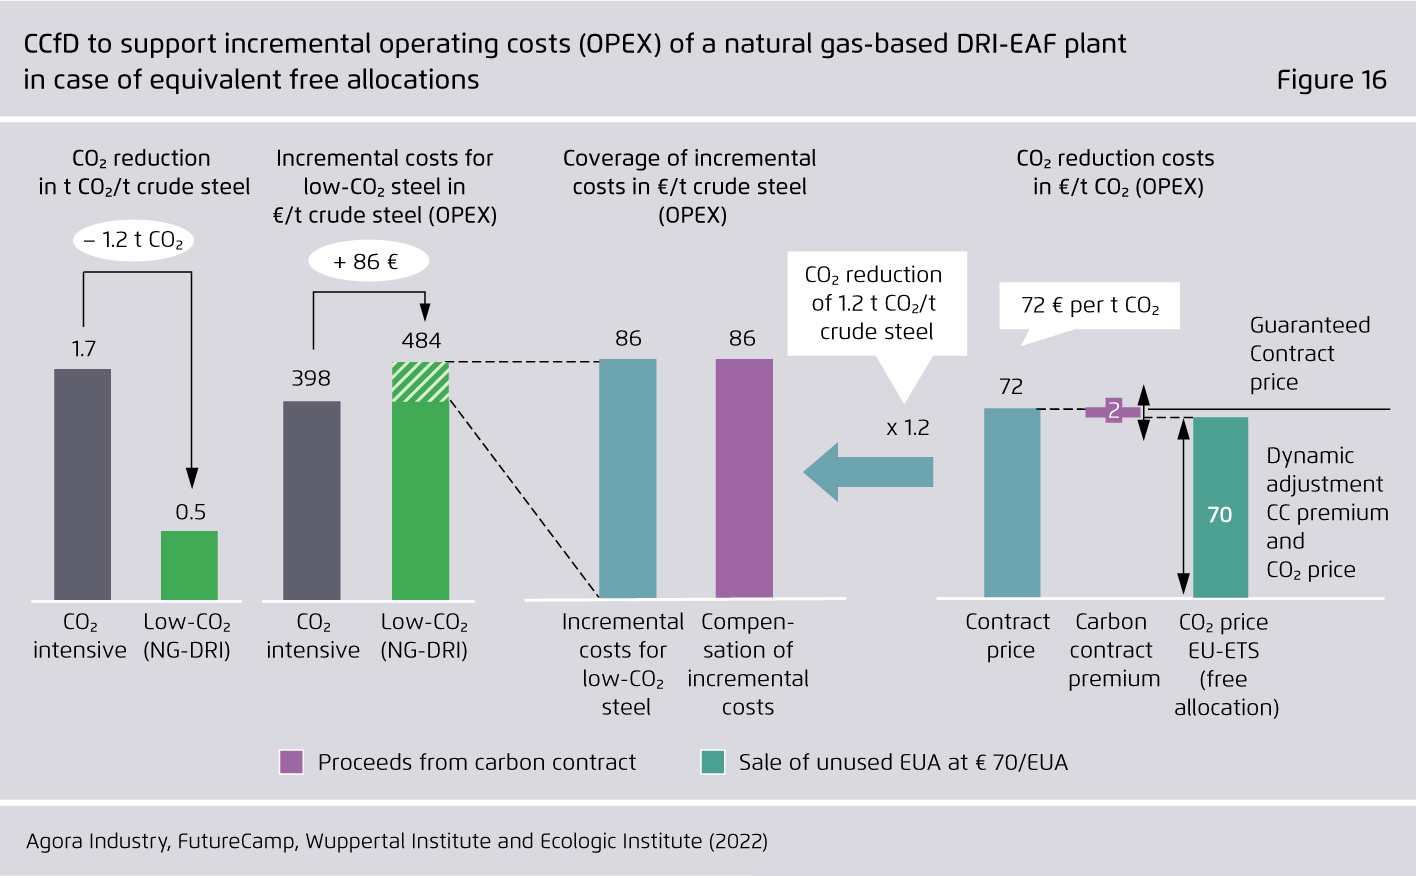 Preview for CCfD to support incremental operating costs (OPEX) of a natural gas-based DRI-EAF plant in case of equivalent free allocations